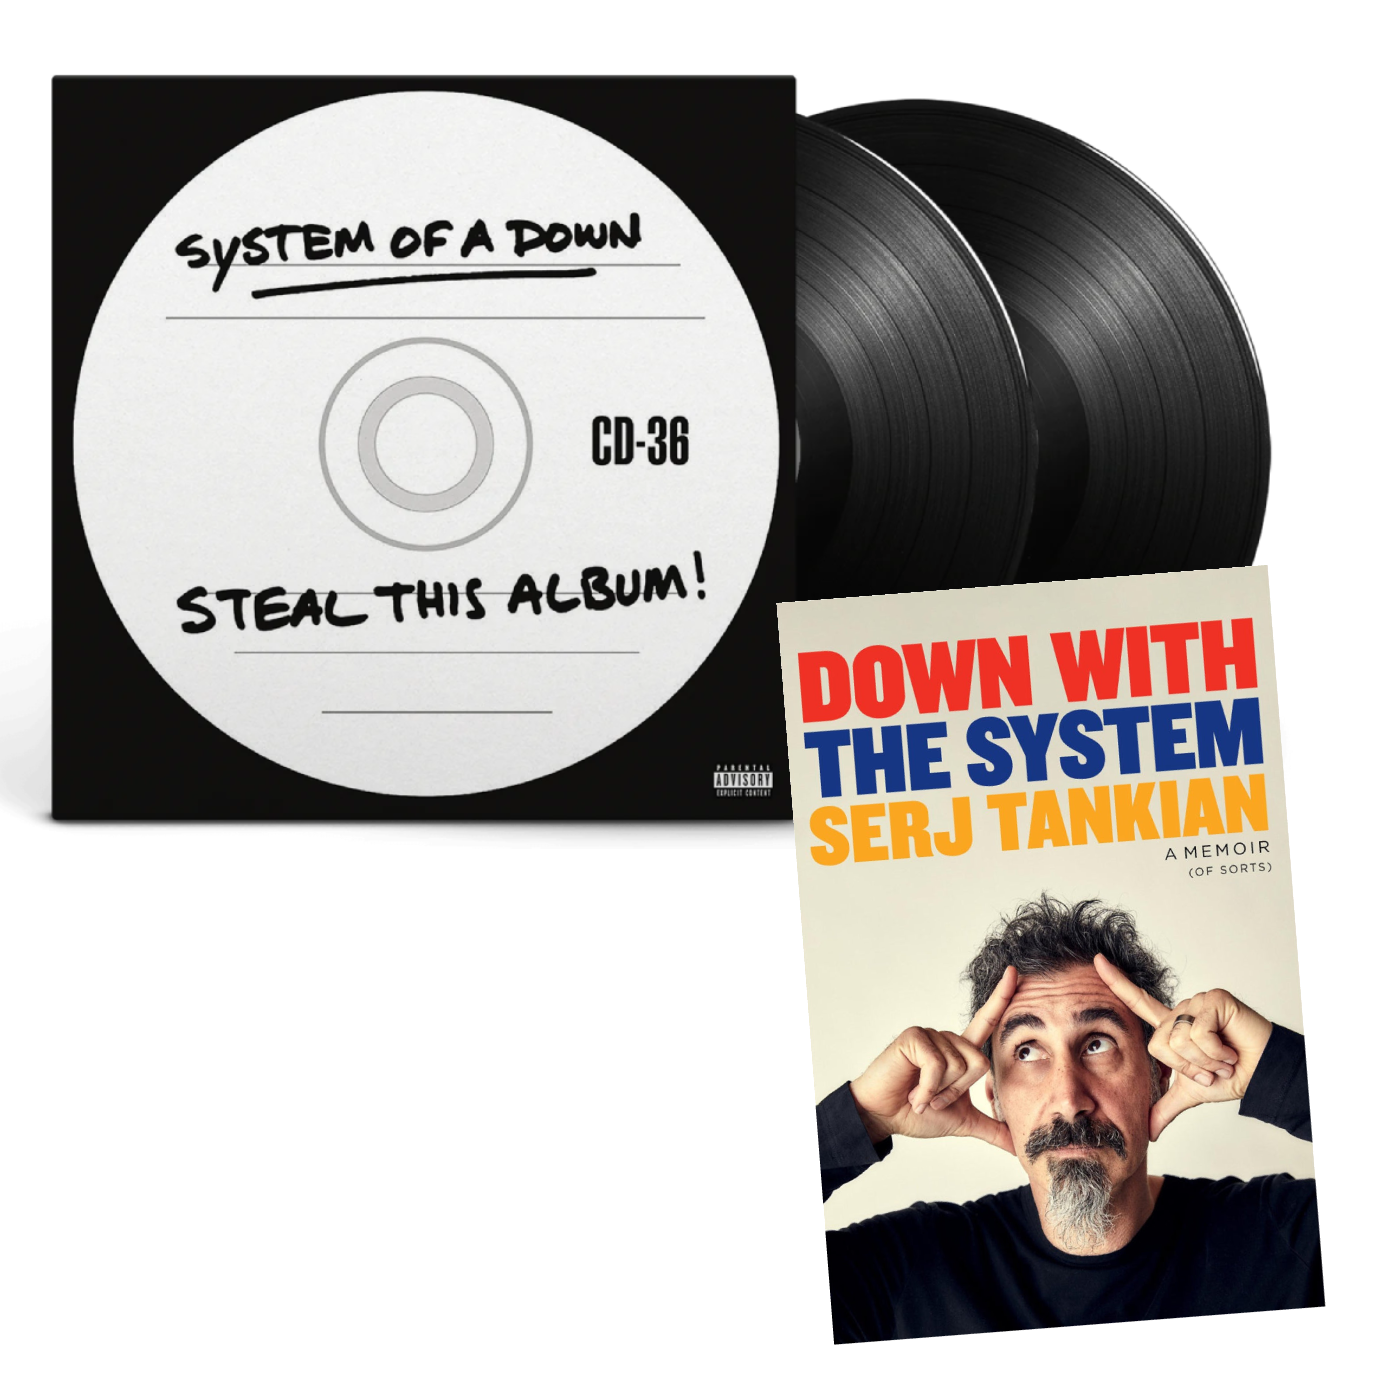 Steal This Album! Vinyl 2LP & Signed Down With The System Book